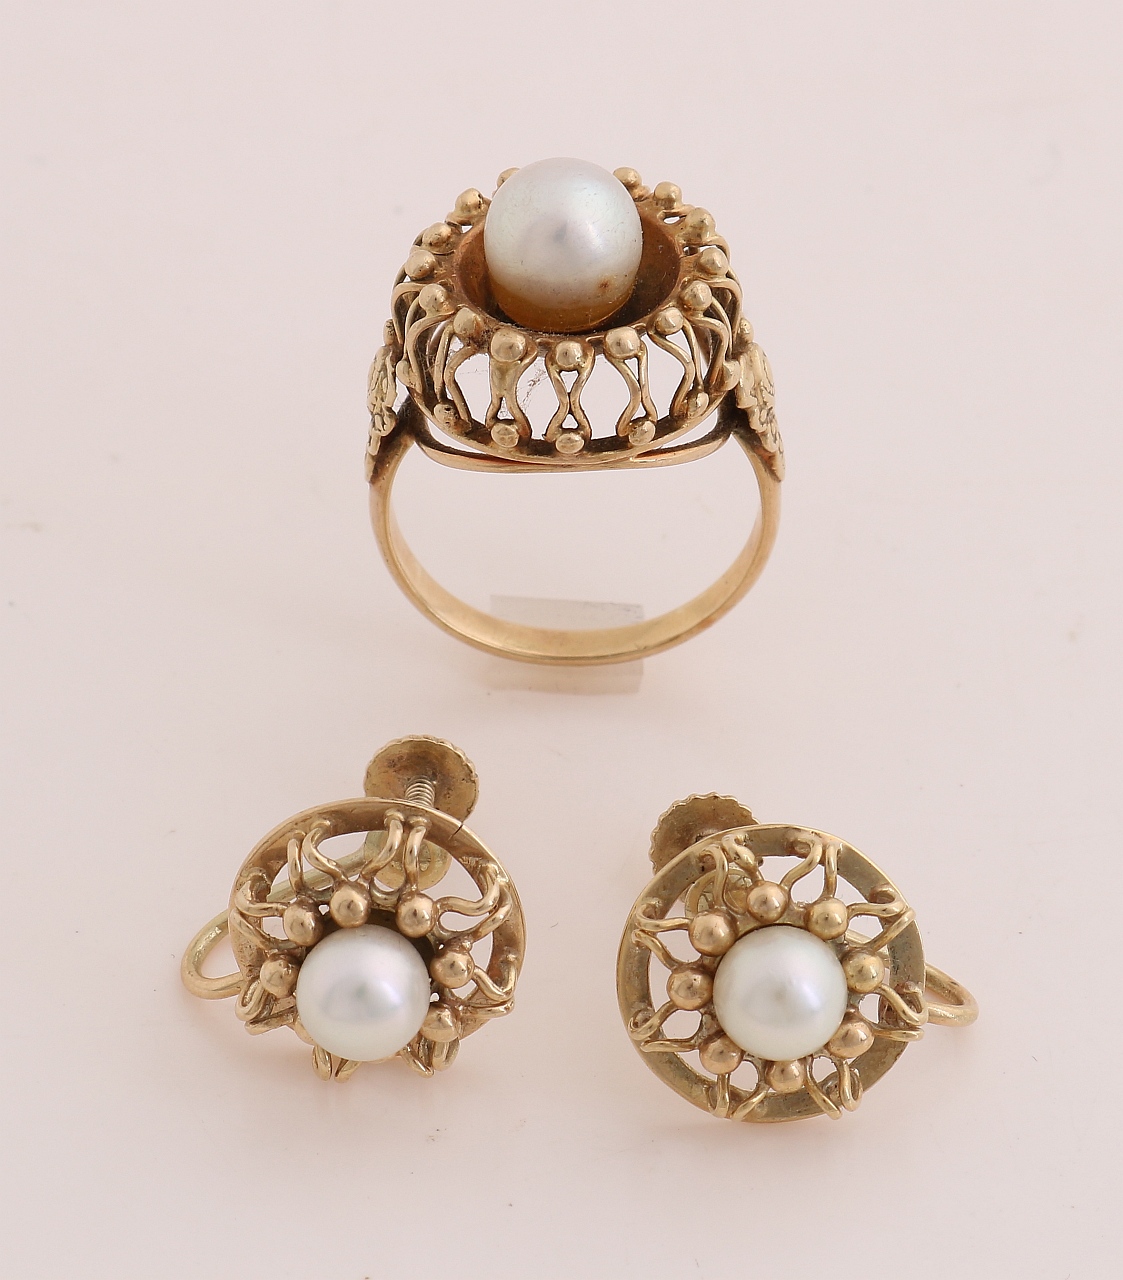 Antique gold earrings and ring with pearl